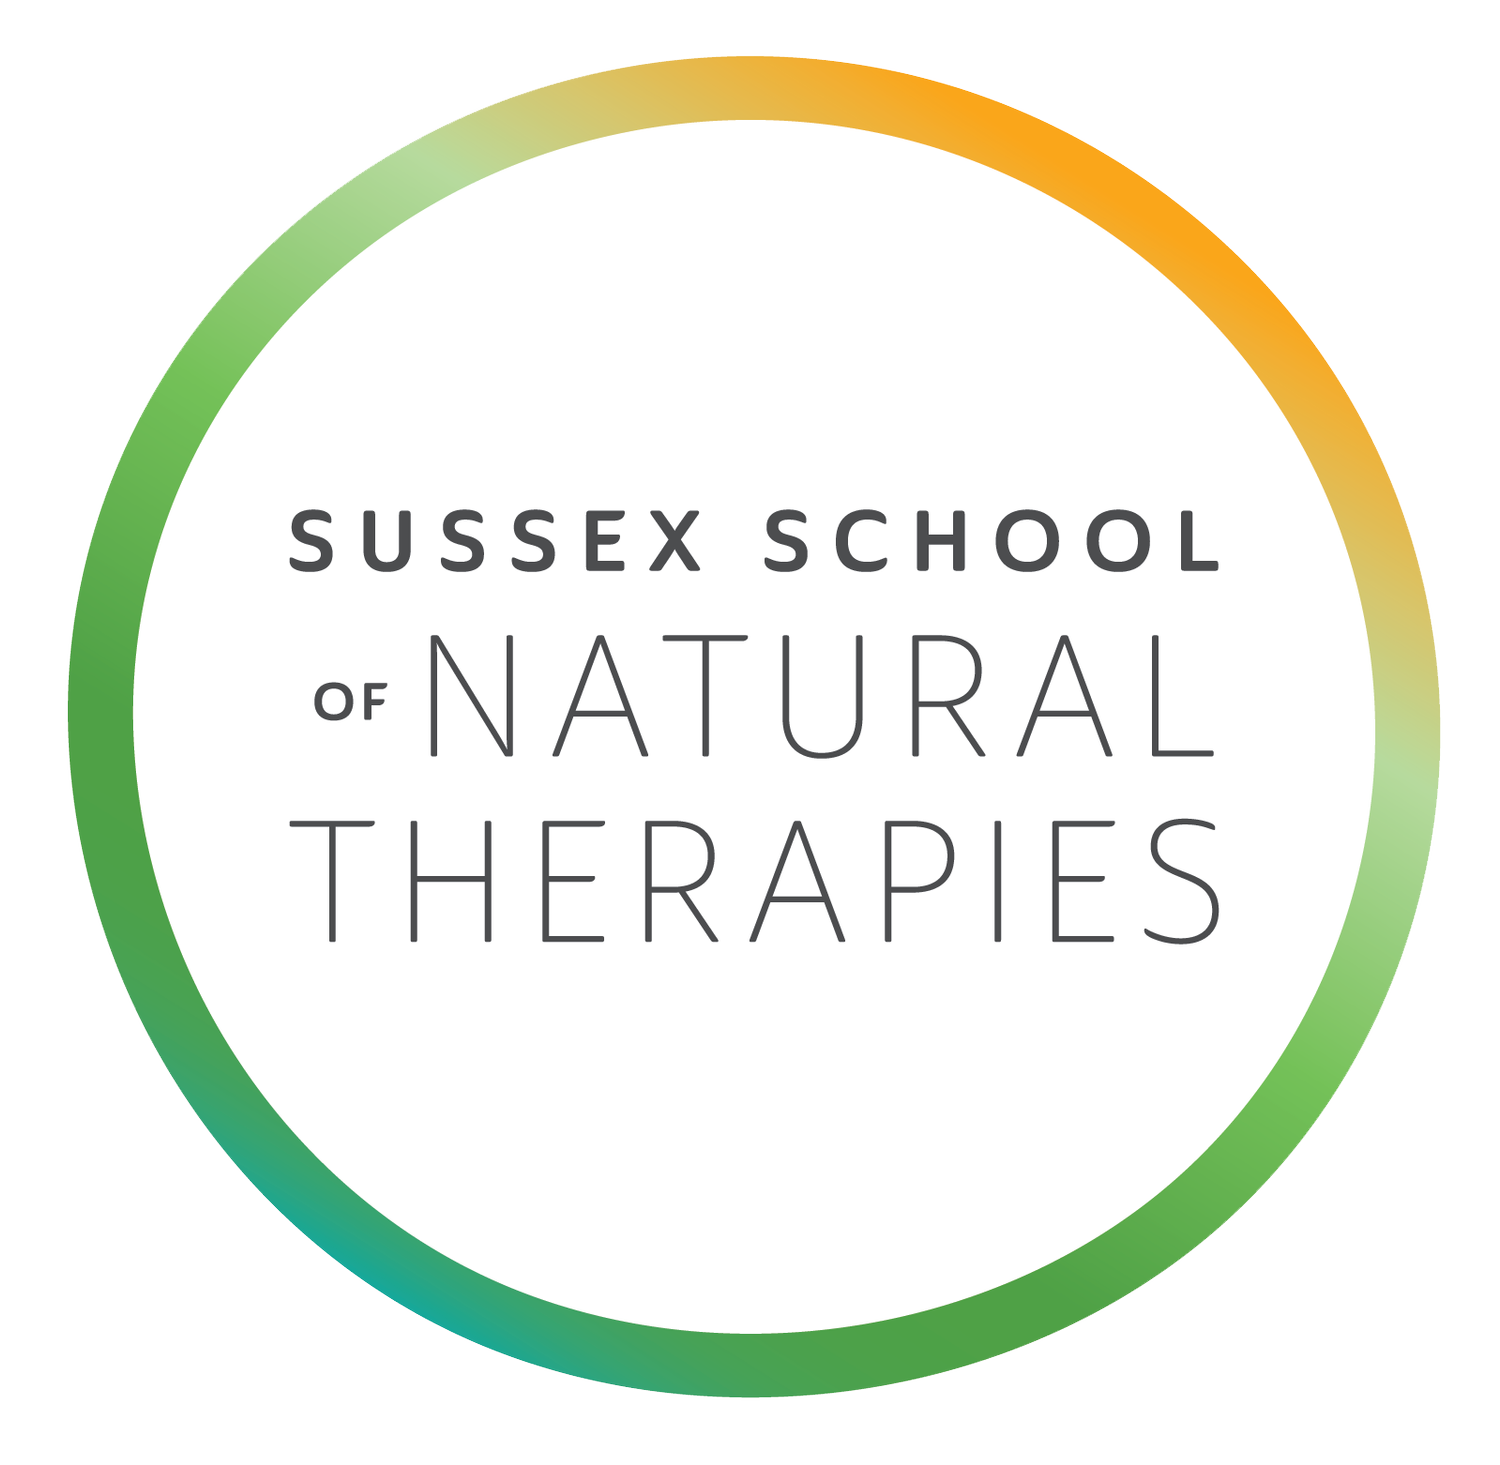 Sussex School of Natural Therapies